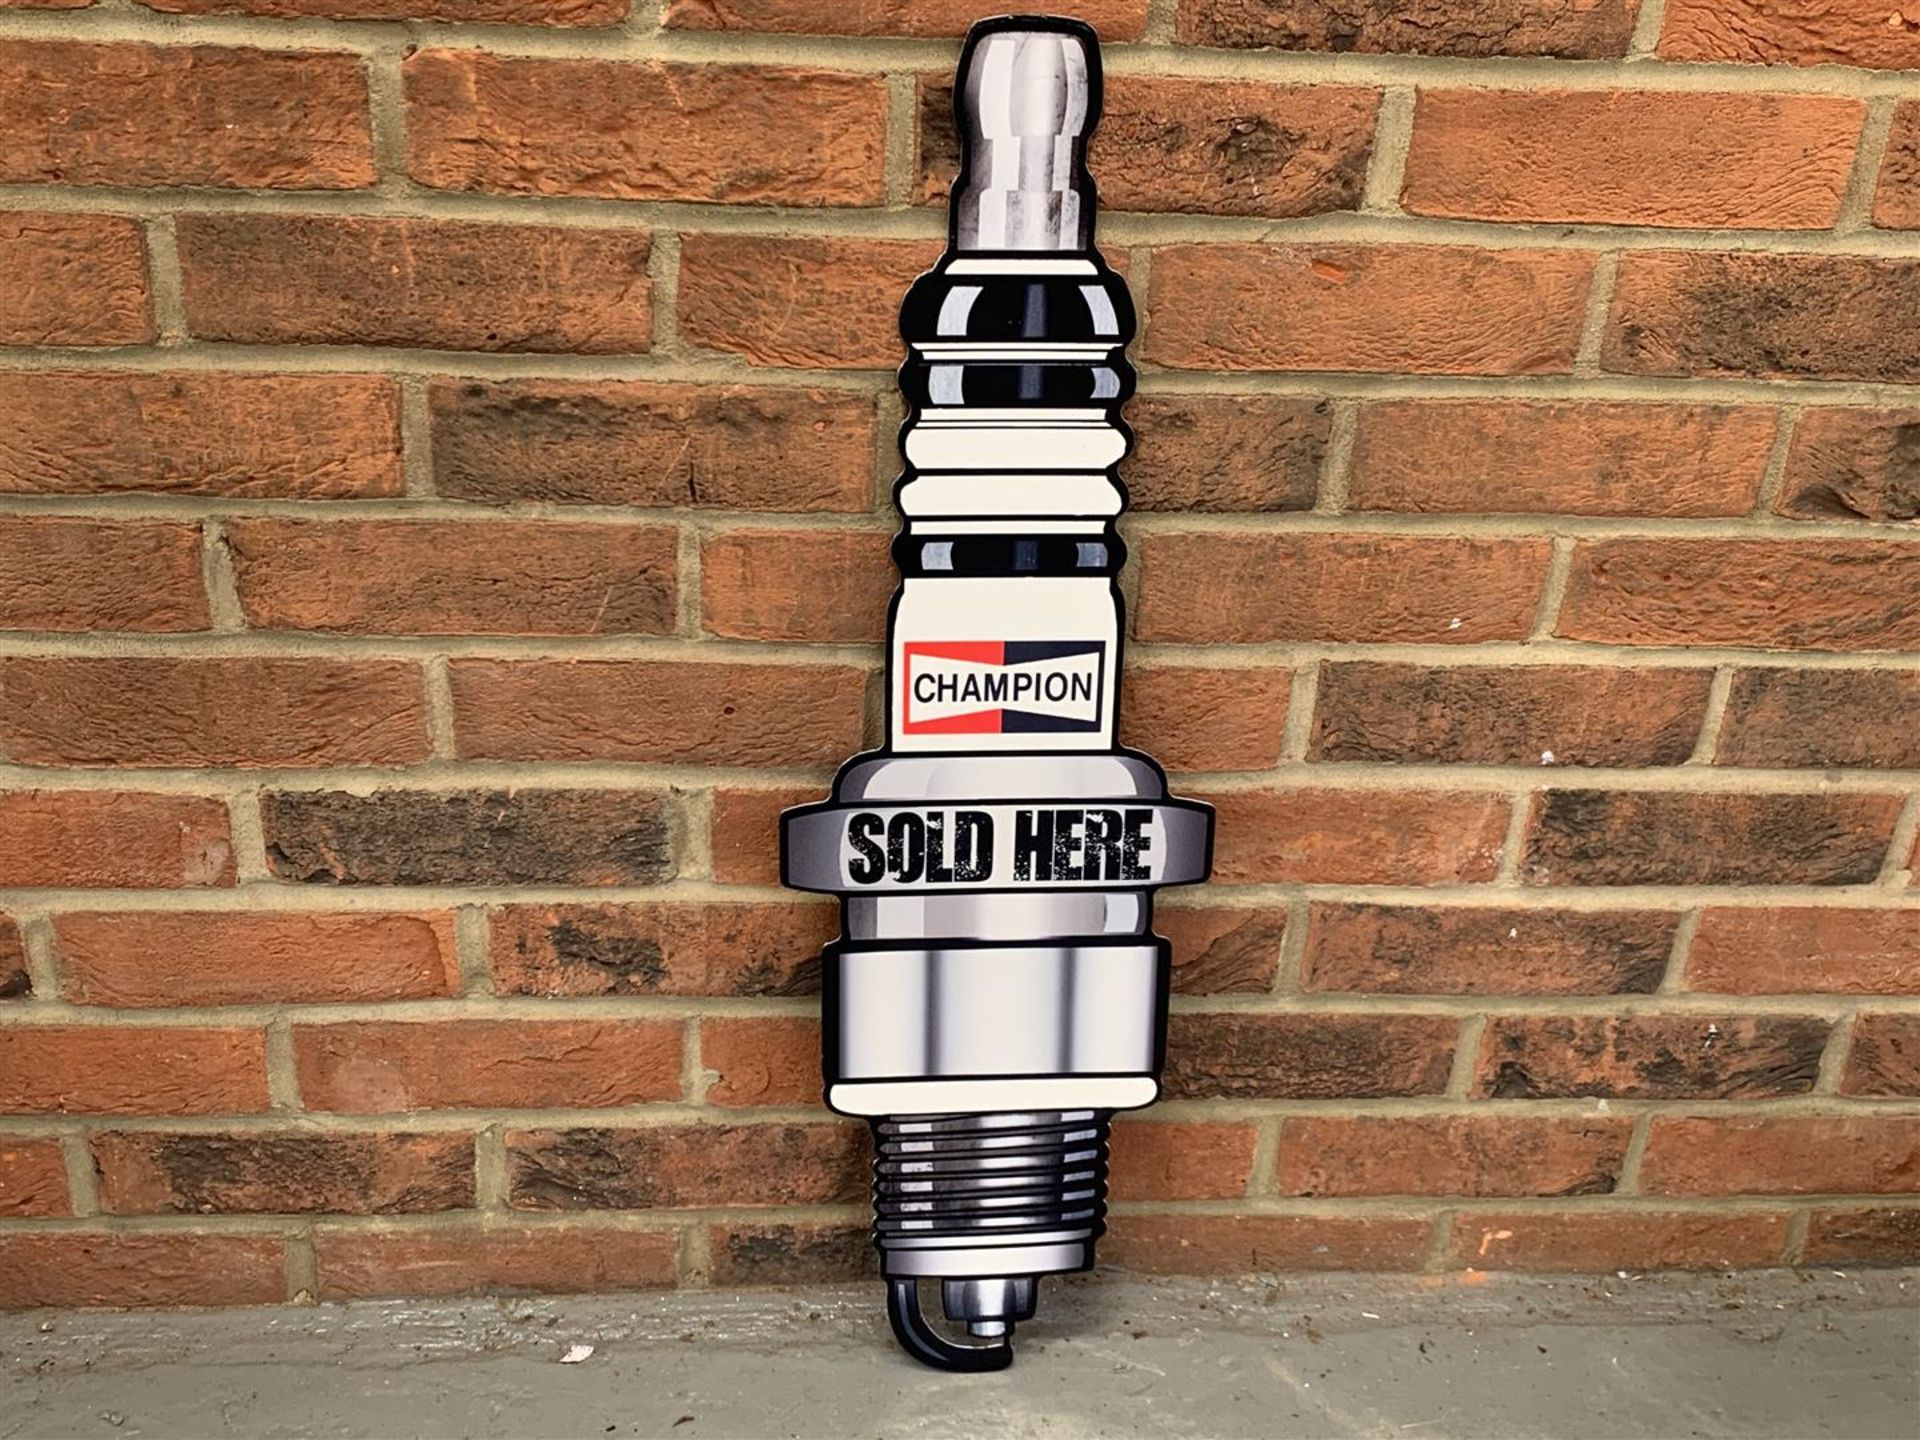 Metal Champion Spark Plugs Sold Here " Sign"